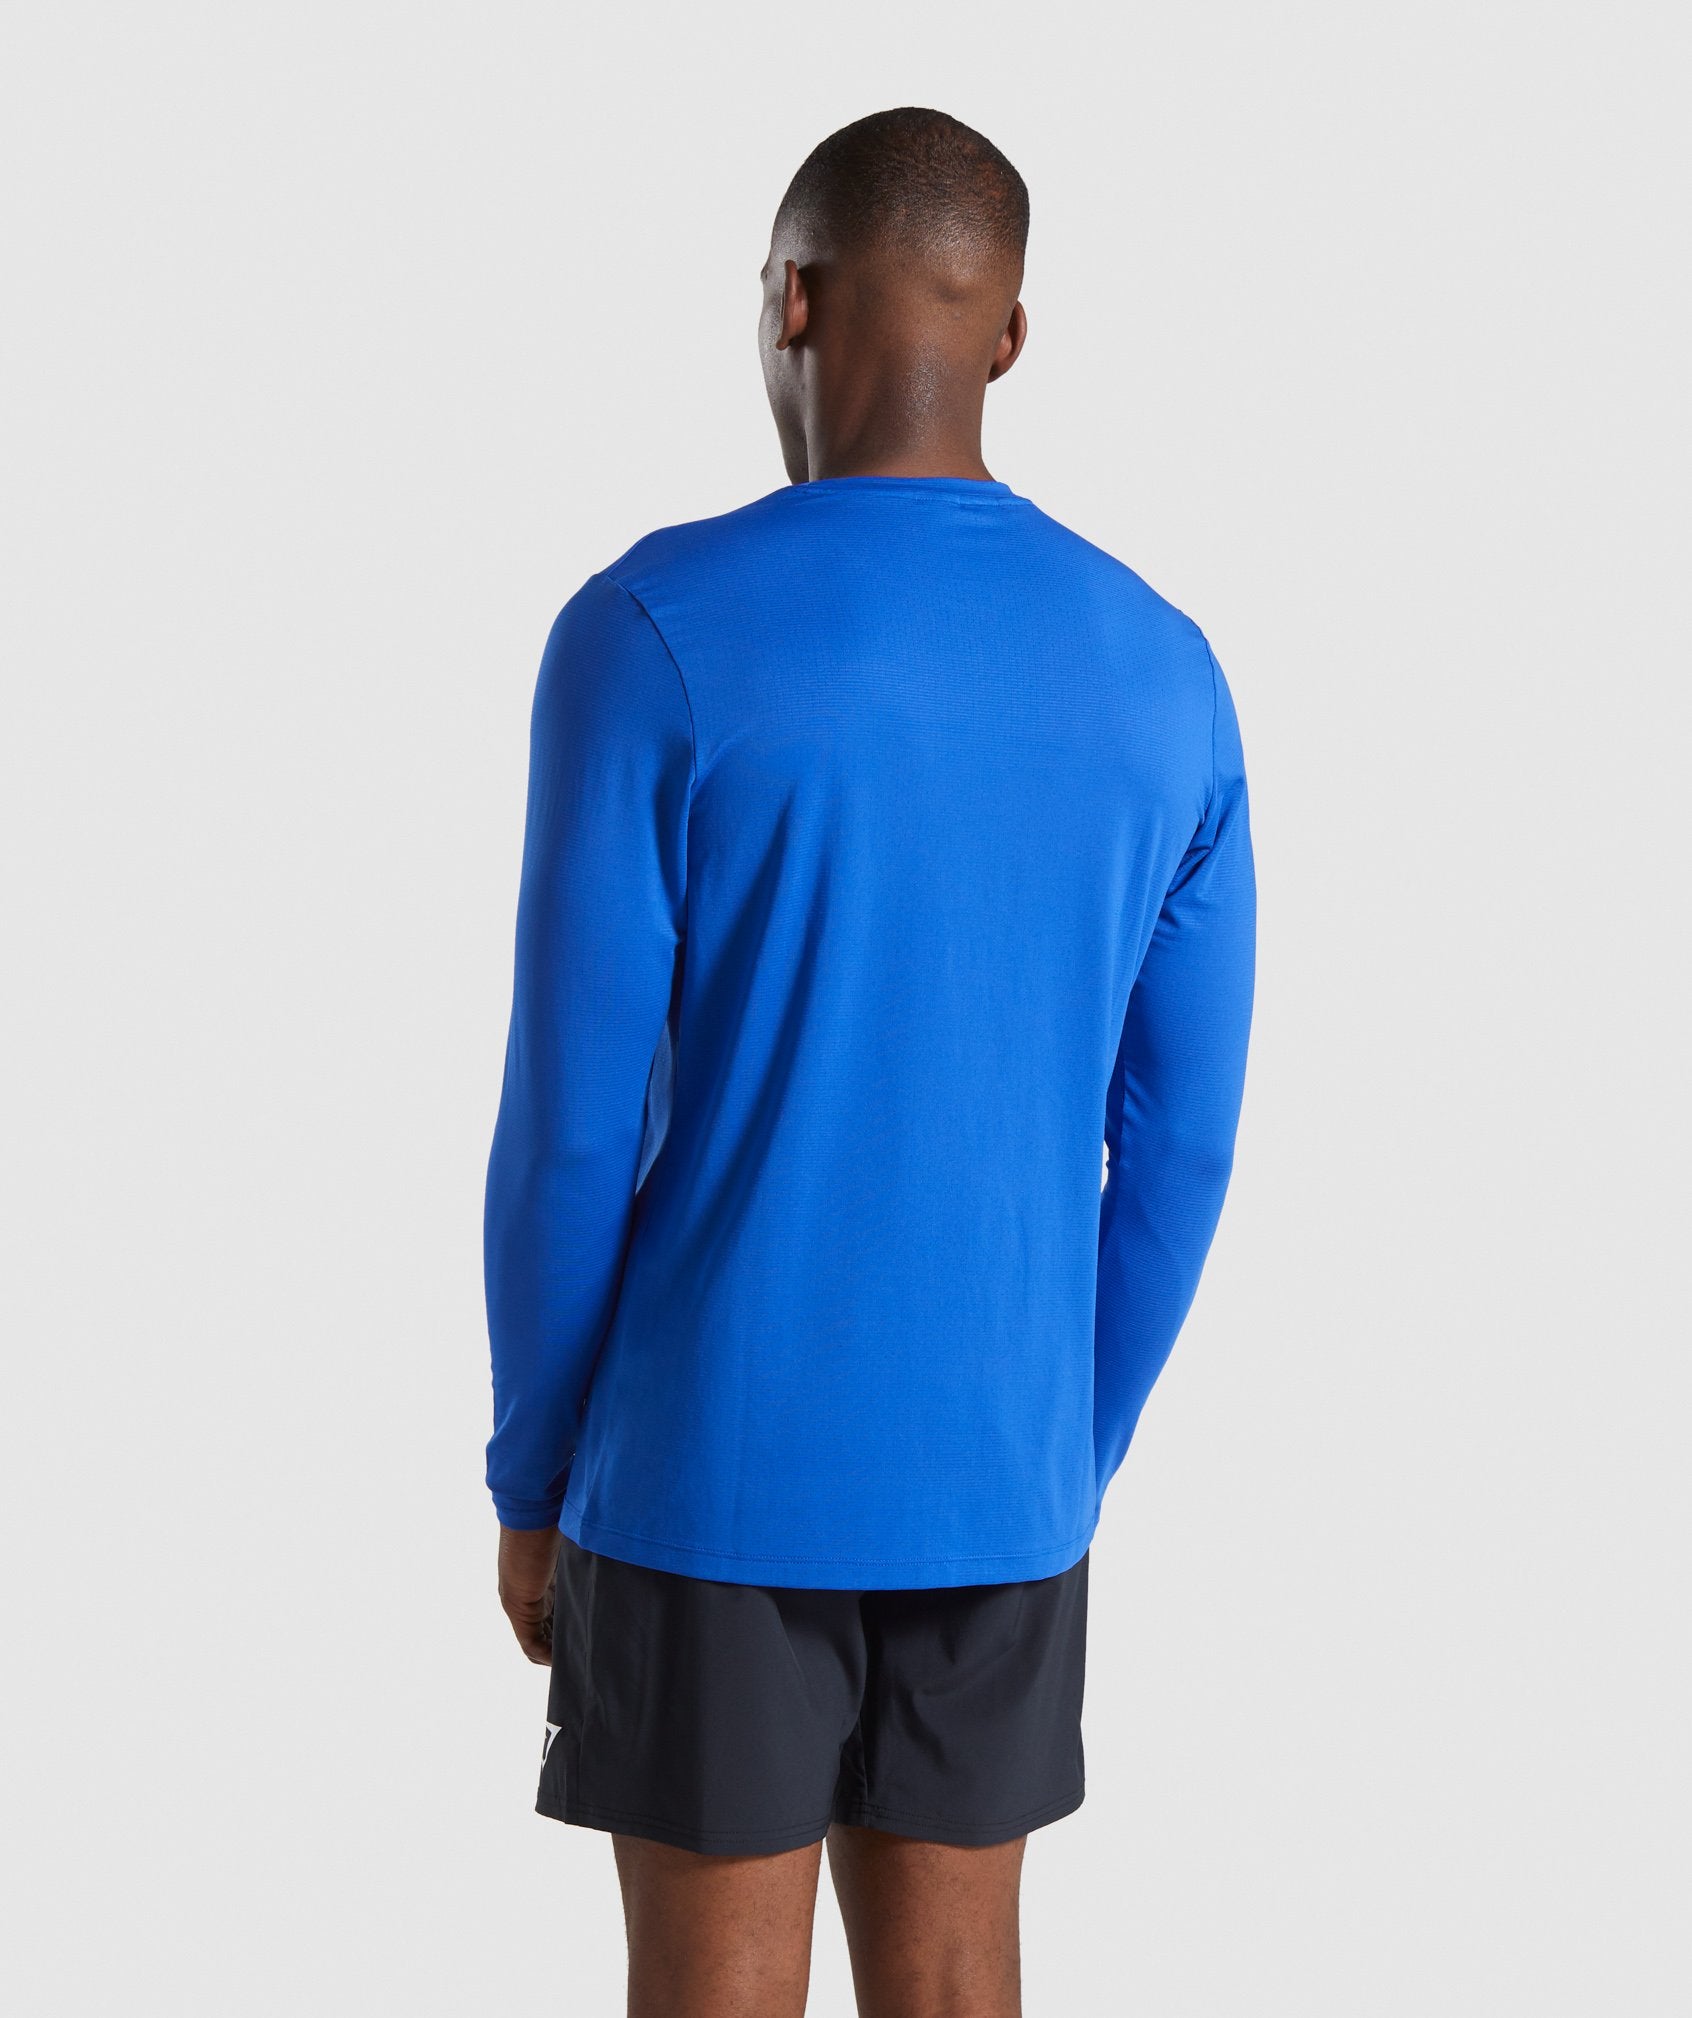 Arrival Long Sleeve T-Shirt in Blue - view 2